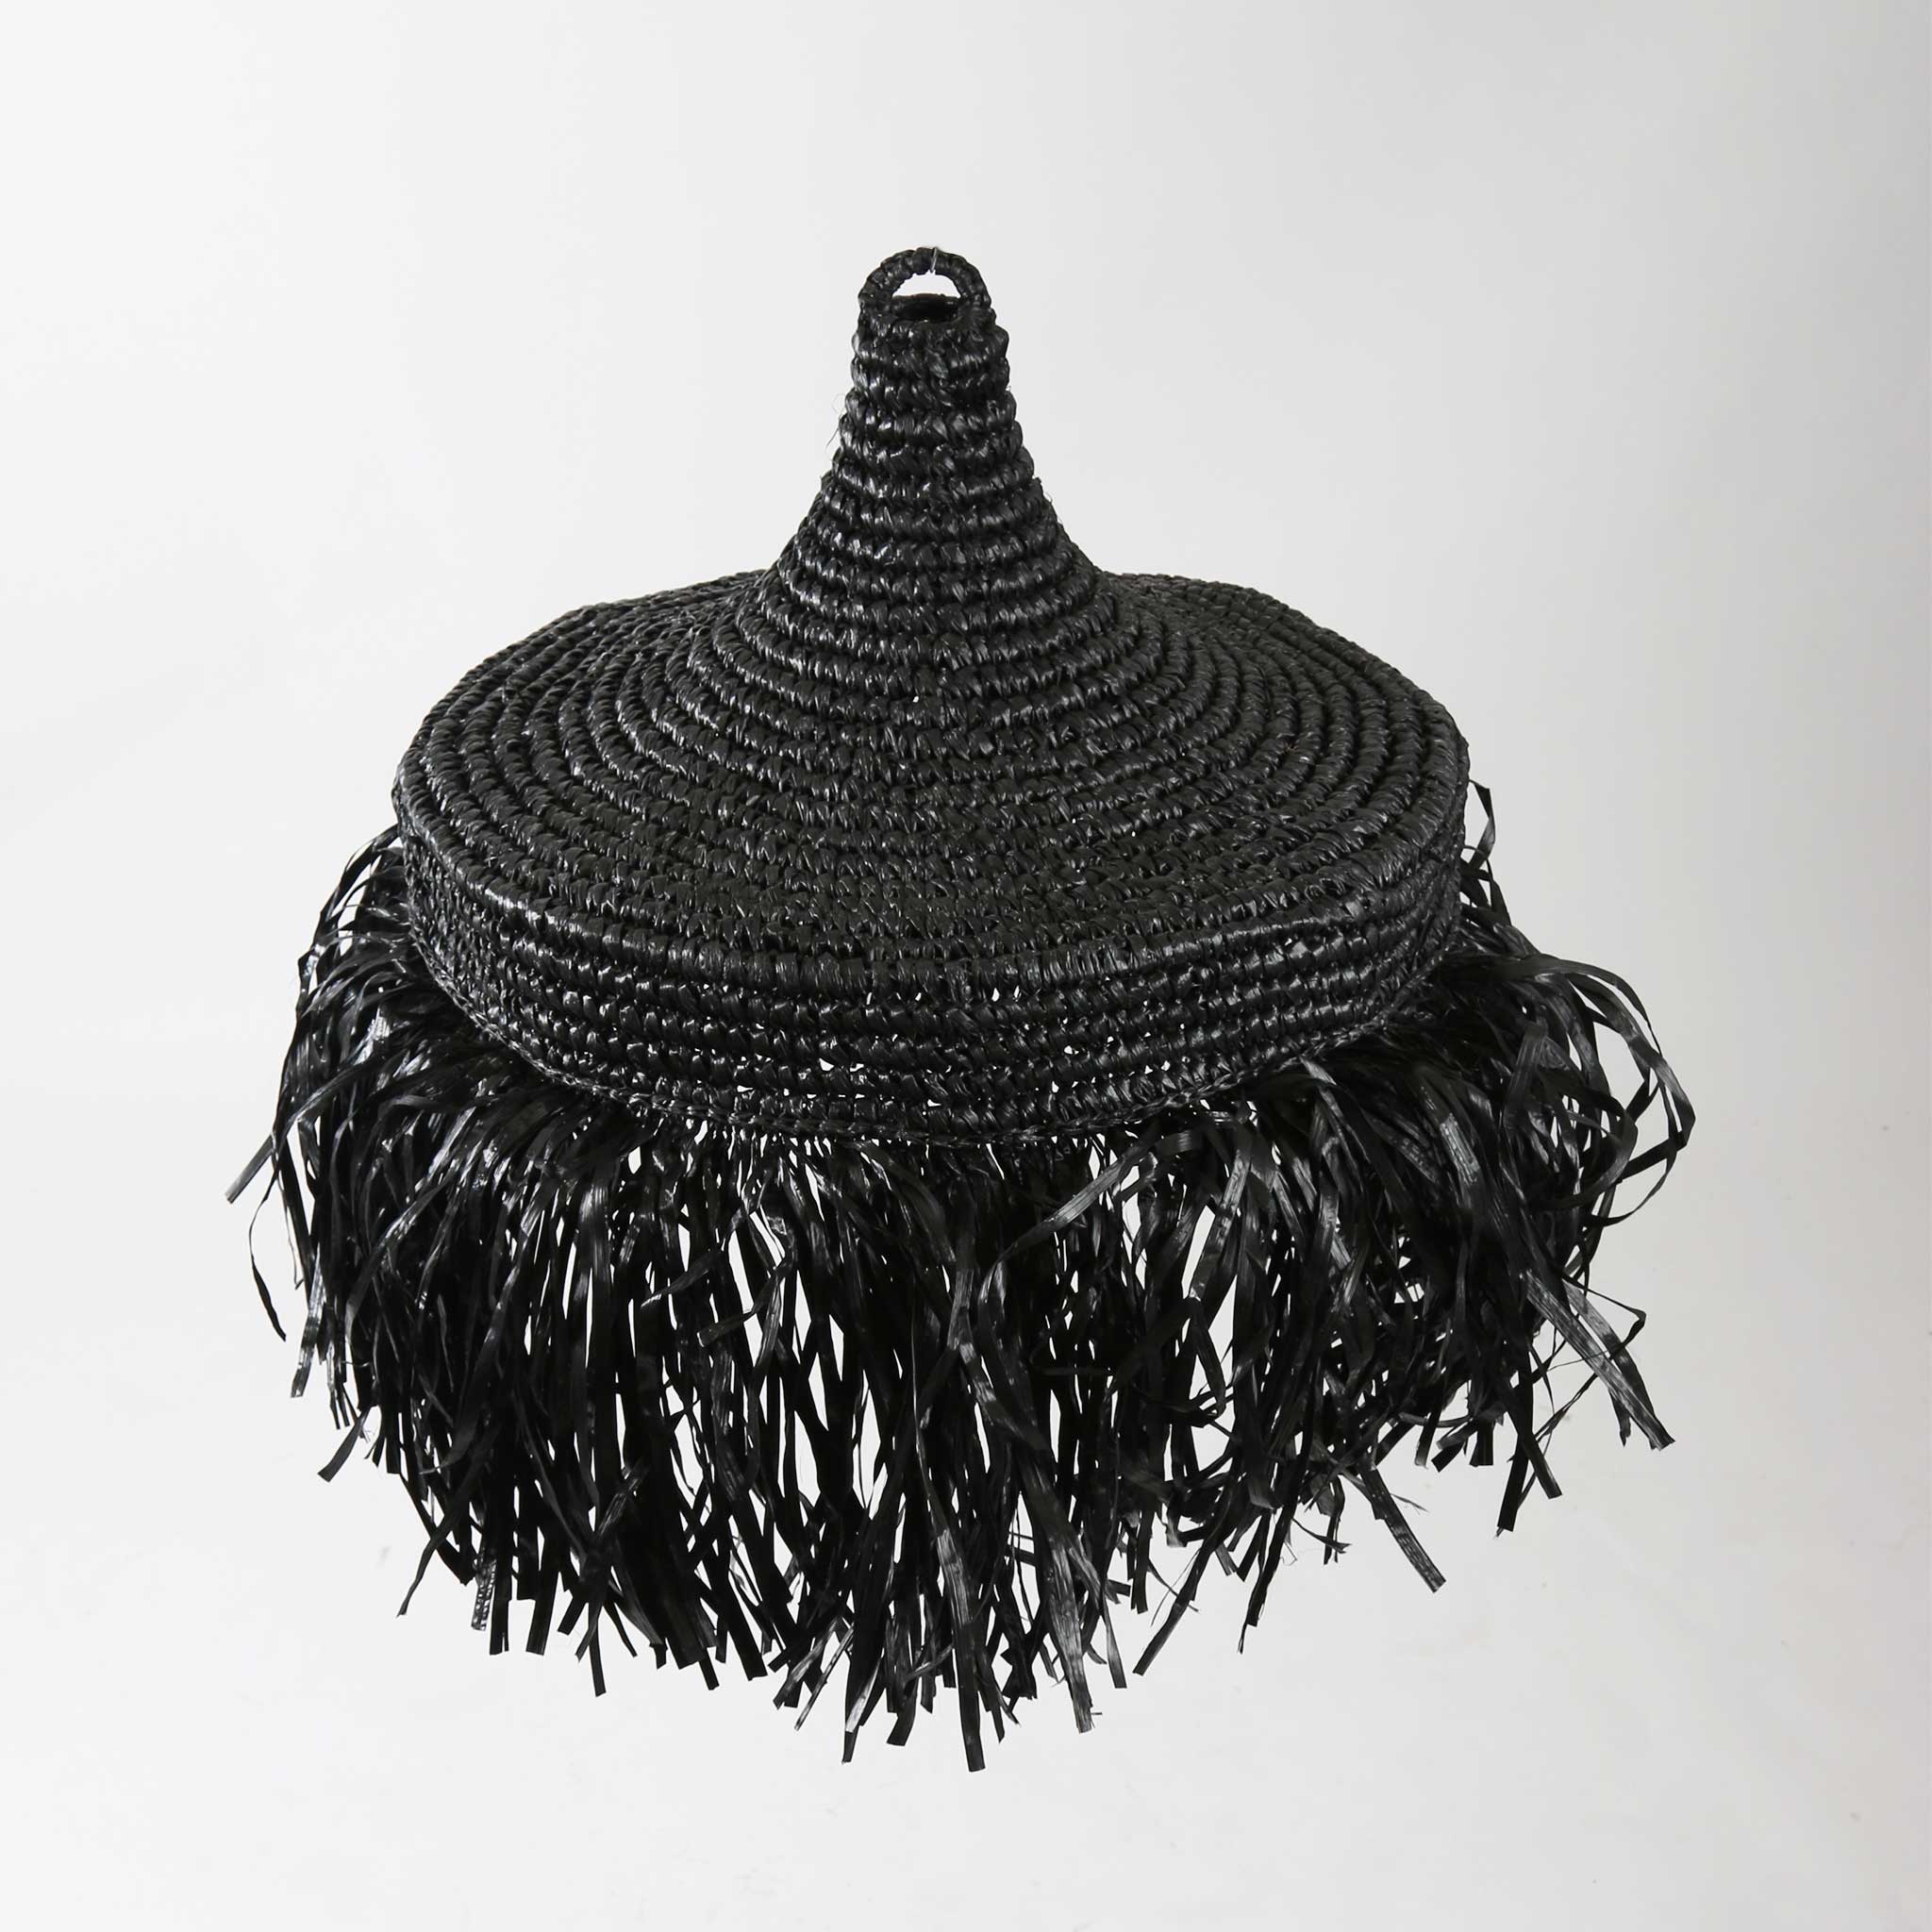 Textured Light Shade with Tassels